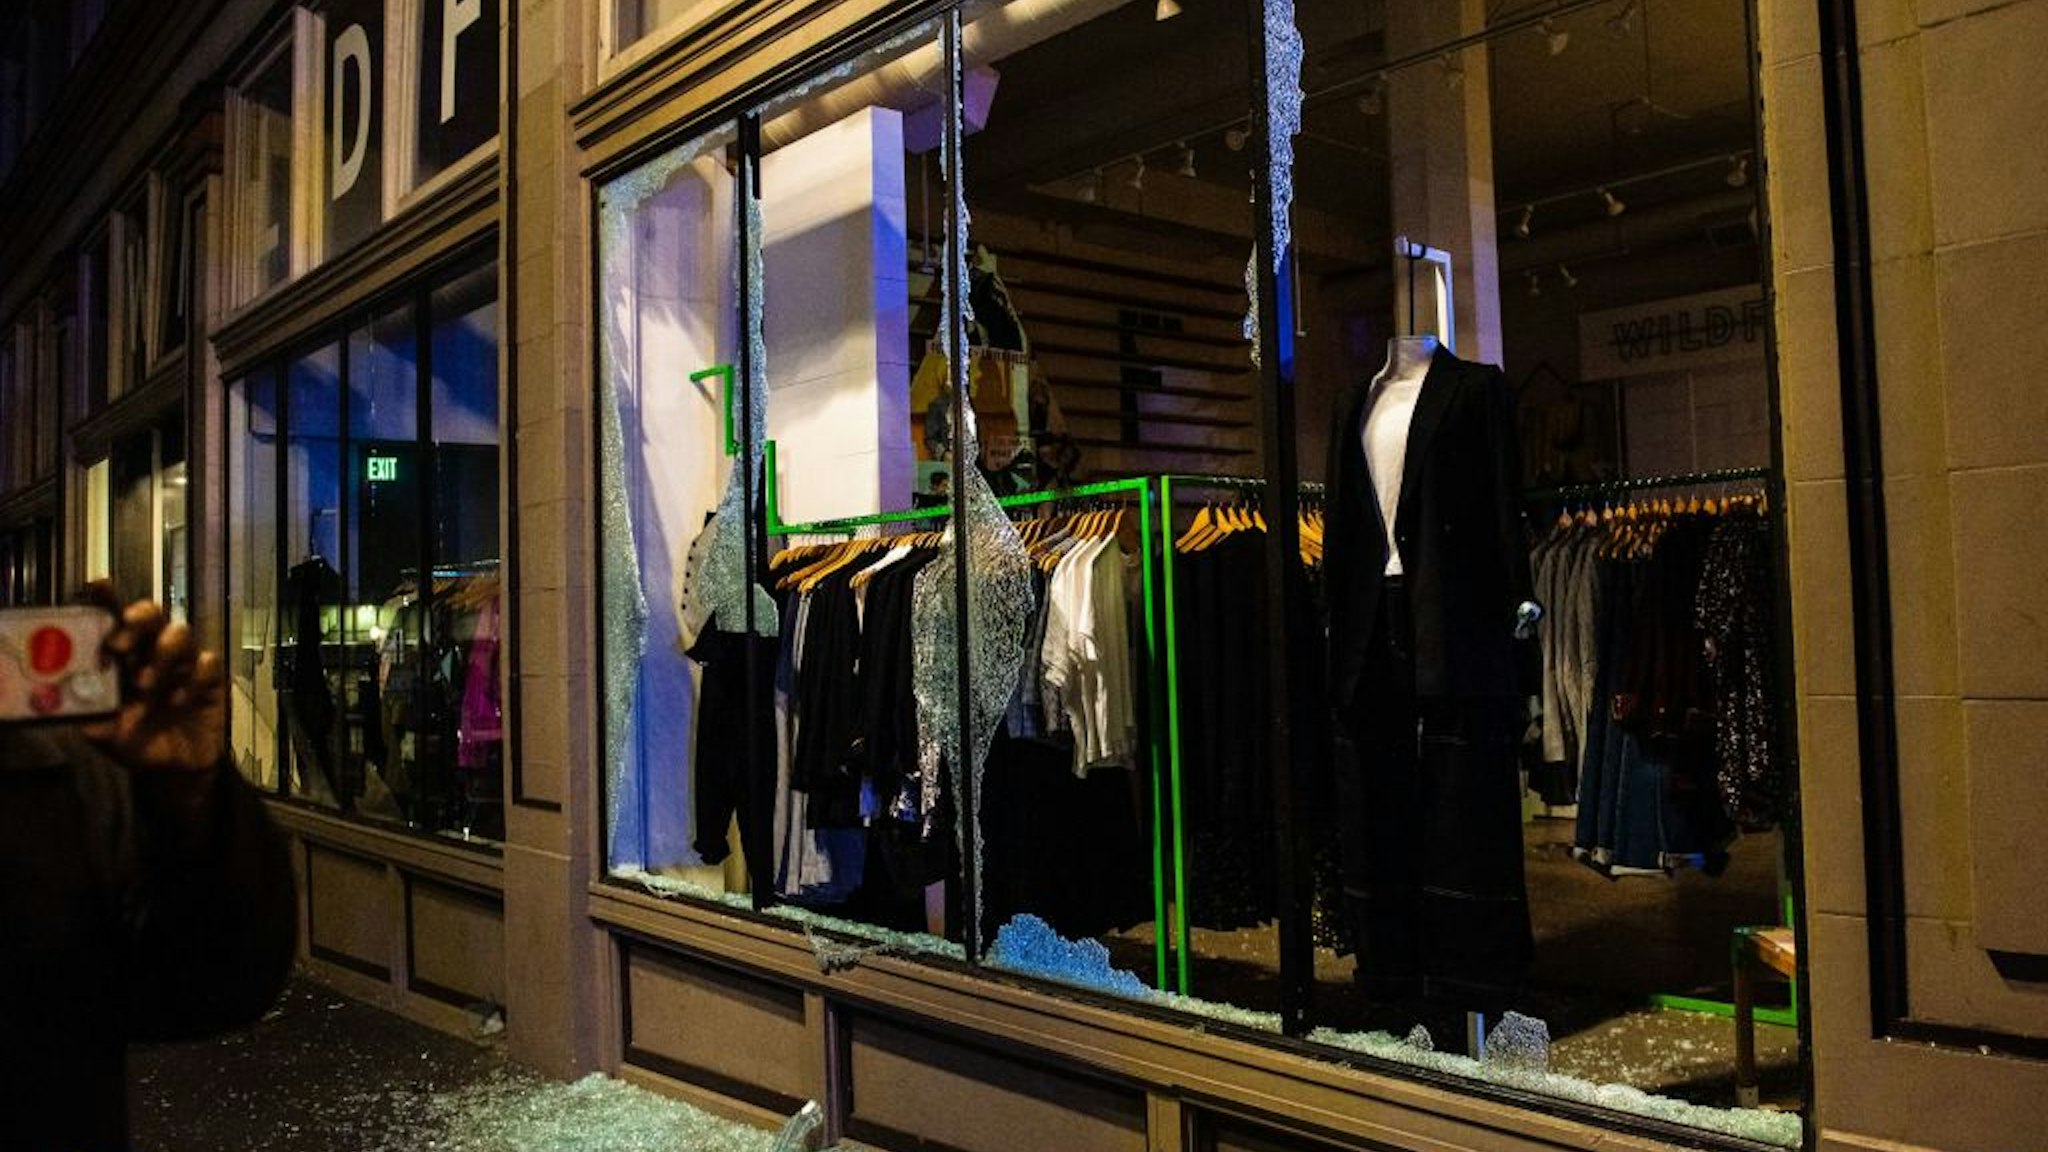 A clothing store is vandalized as police confront protesters in Portland, Oregon on November 4, 2020, during a demonstration called by the "Black Lives Matter" movement, a day after the US Presidential Election.